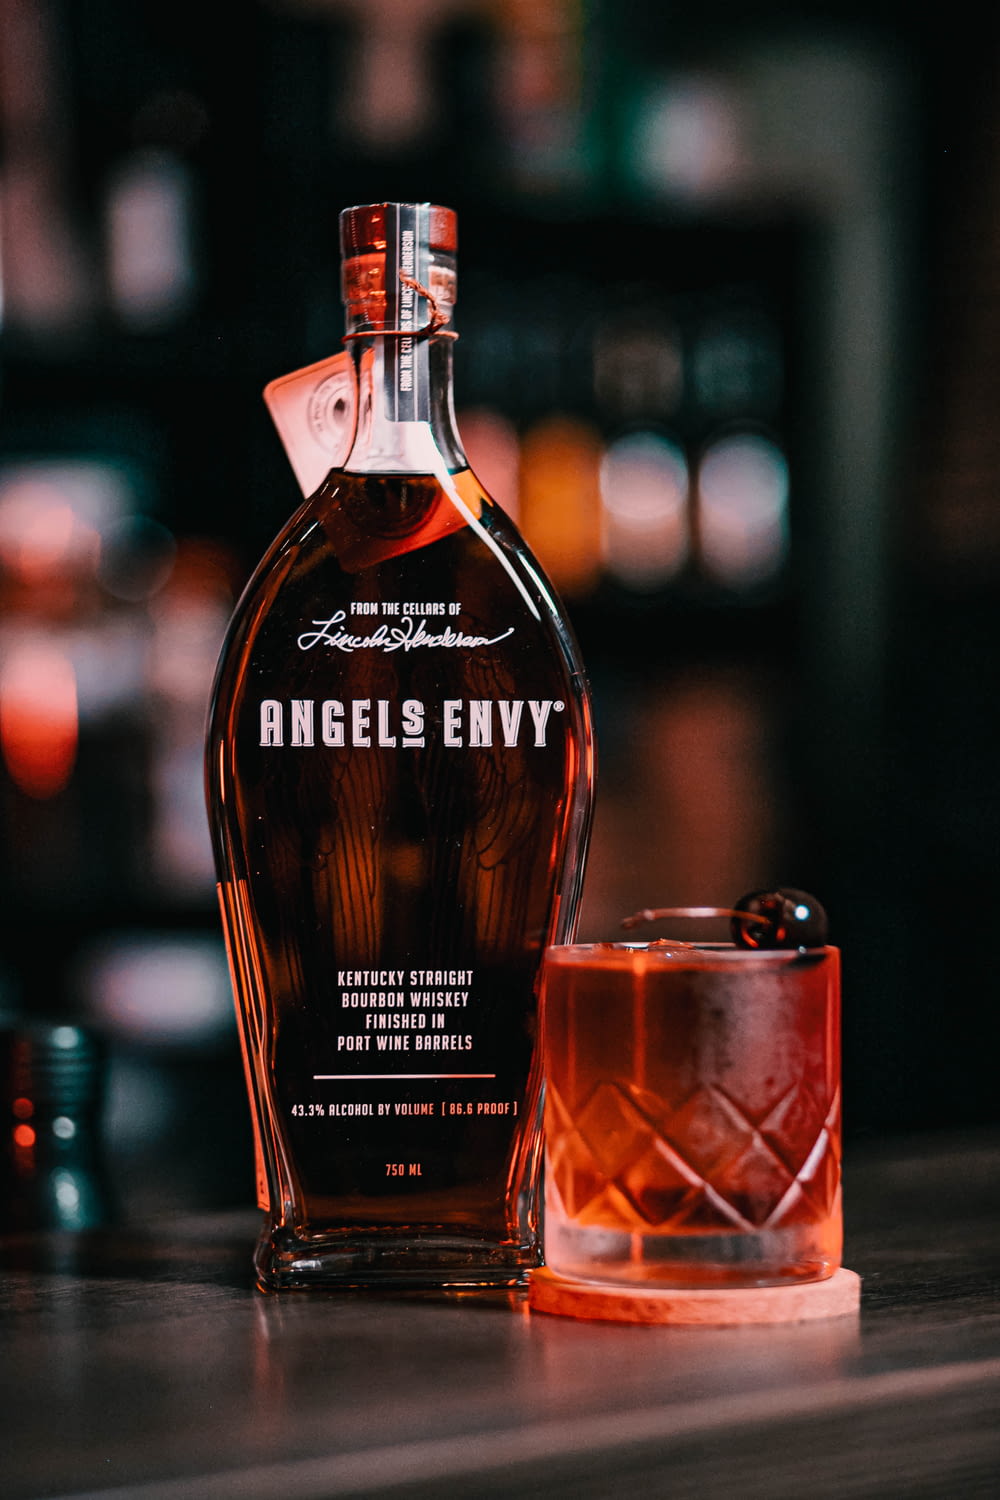 a bottle of angel's envy next to a shot glass